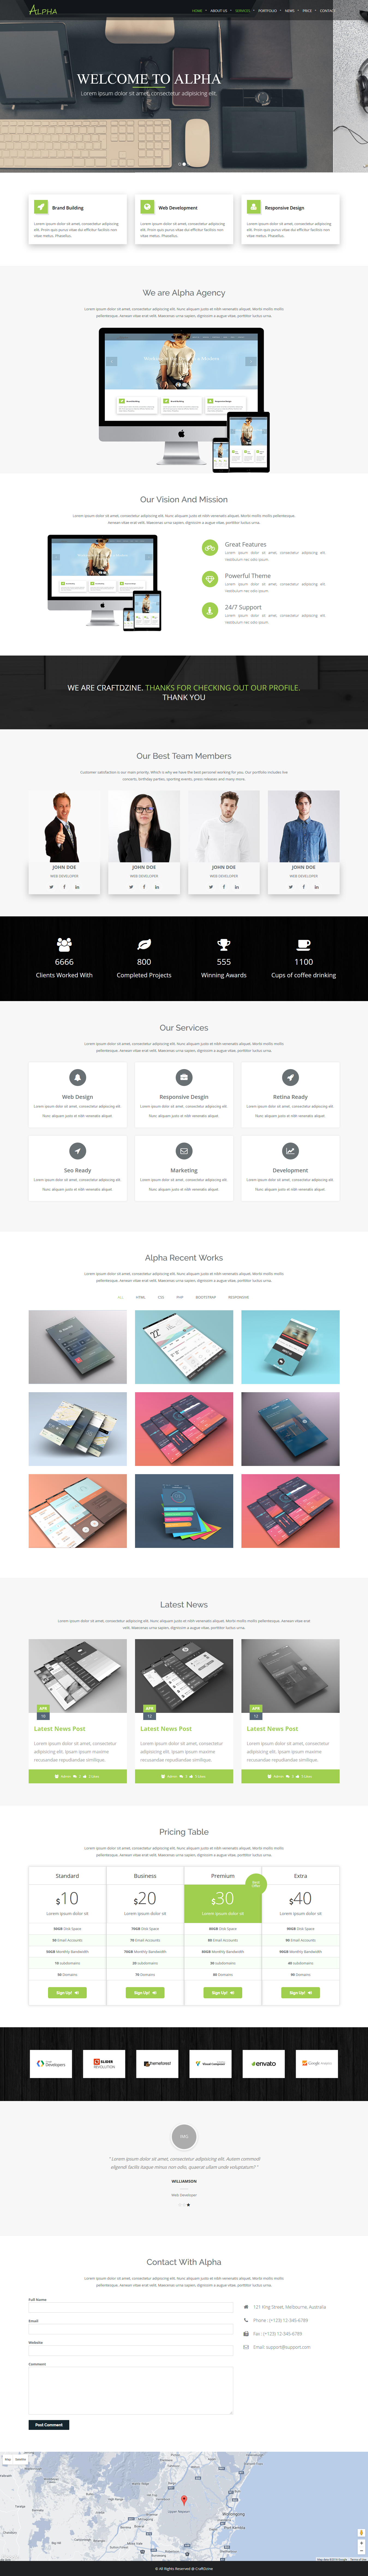 Alpha - One Page Agency HTML5 Template - 1